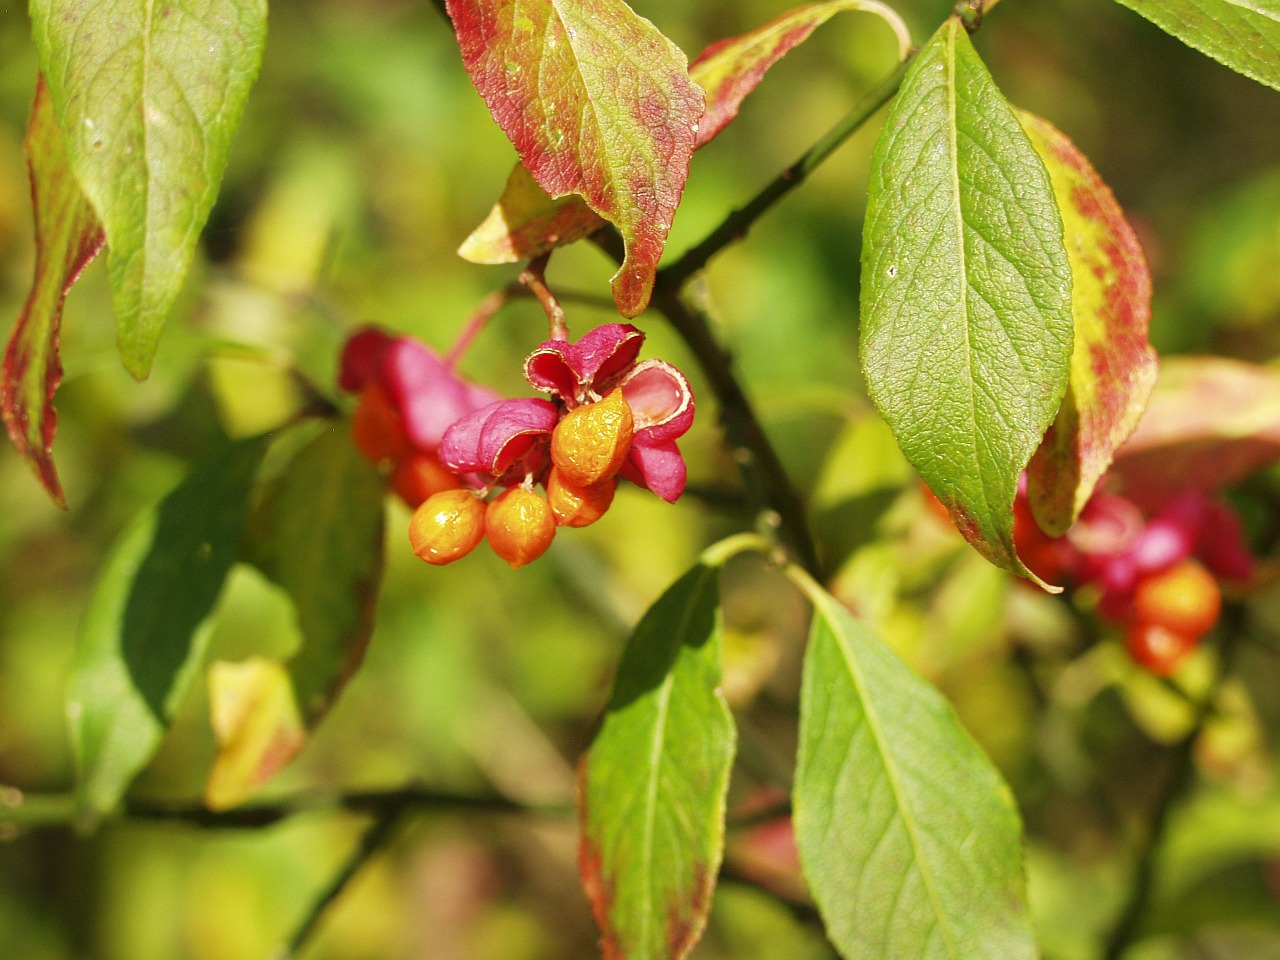 spindle fortunei seeds free photo